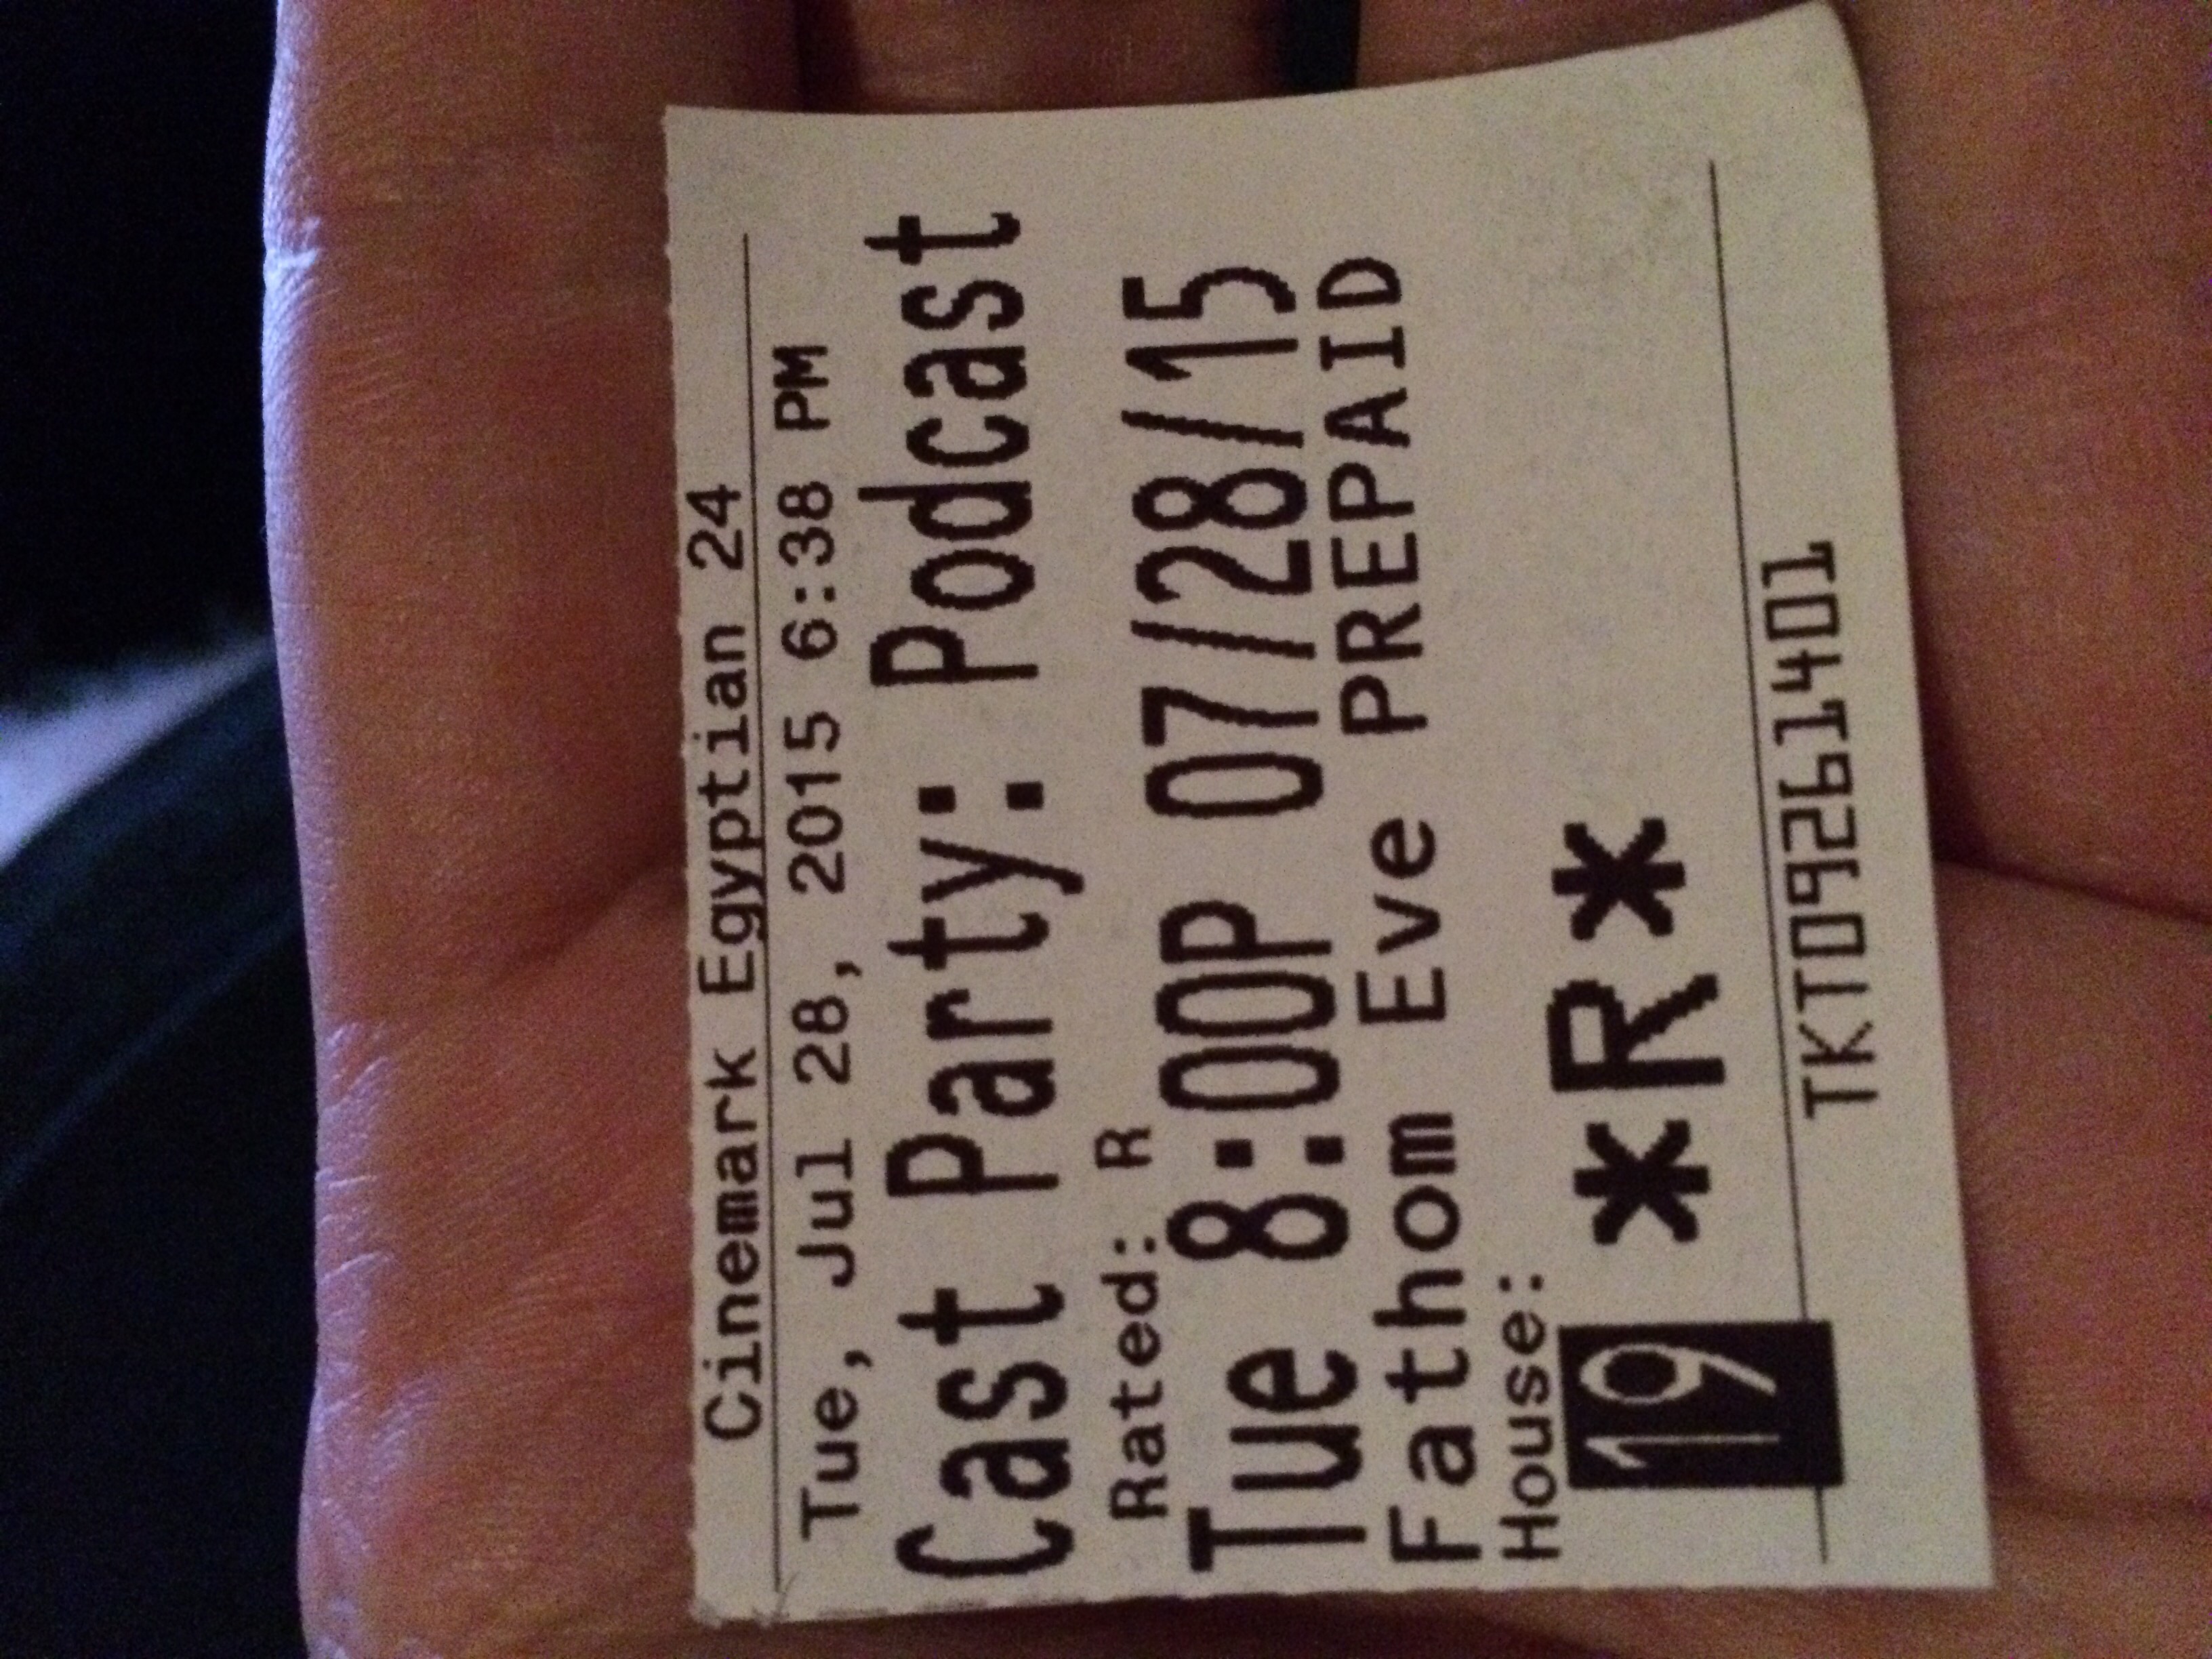 cast party ticket